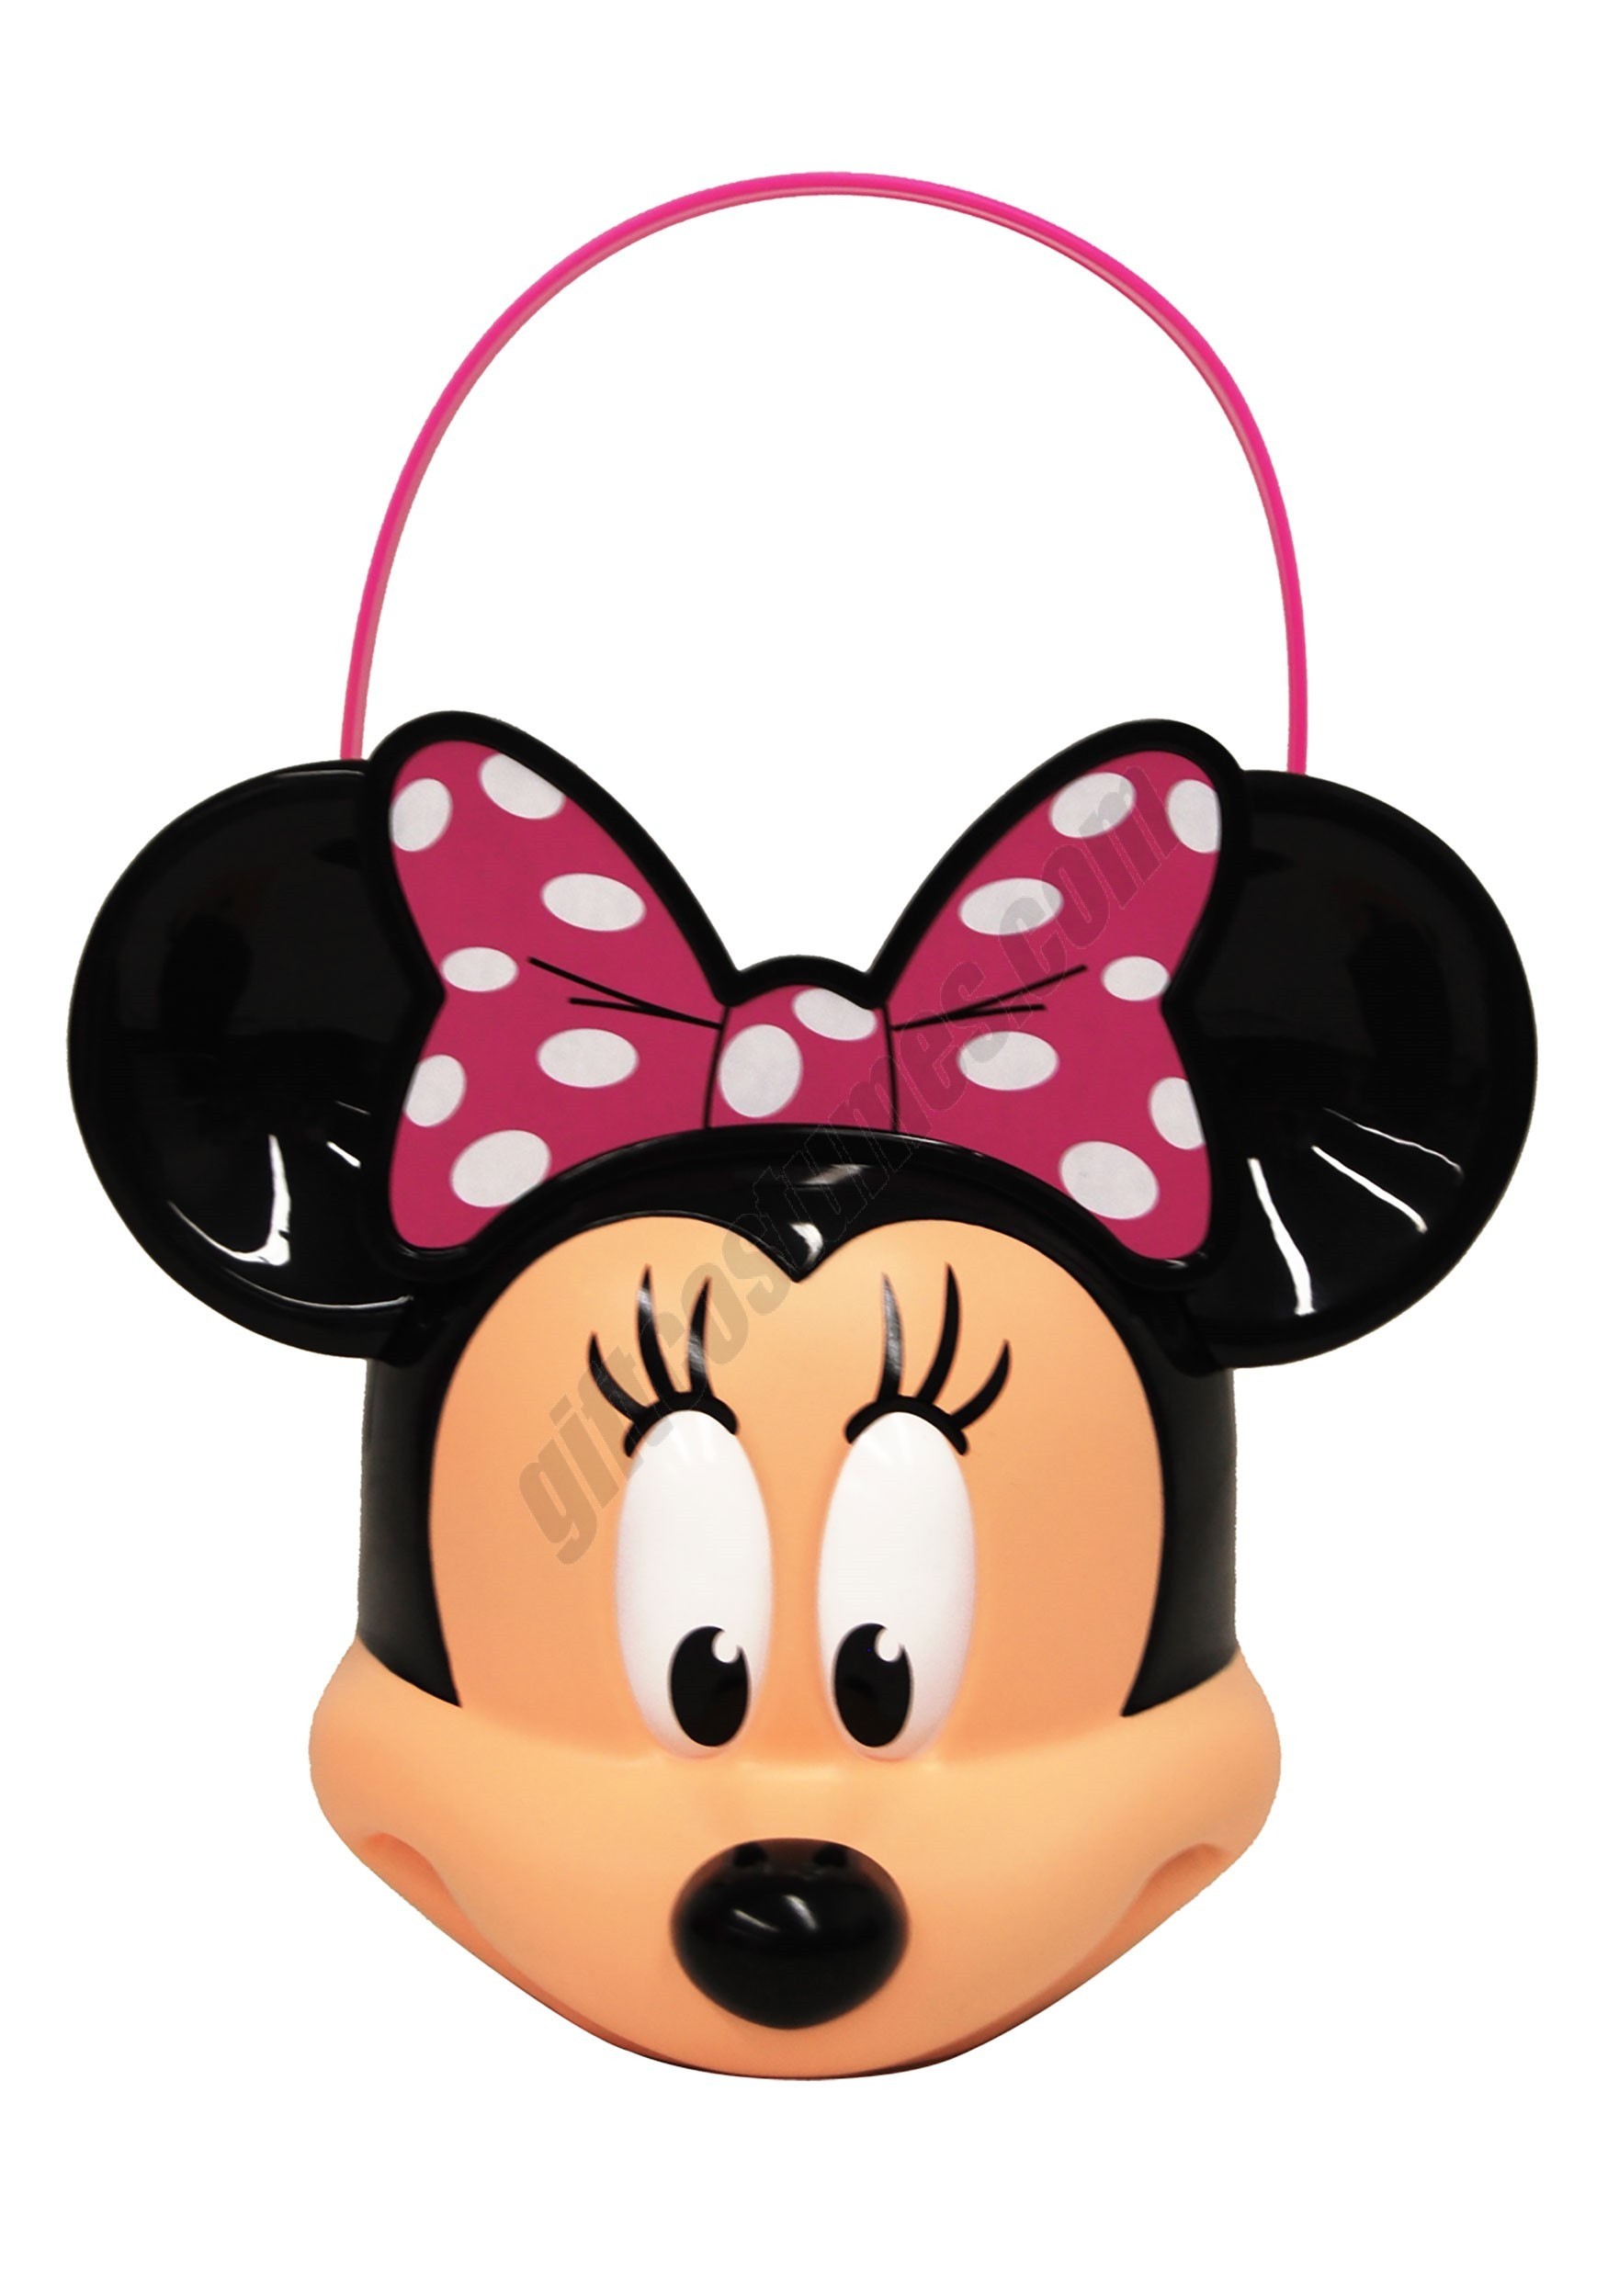 Minnie Mouse Bucket Treat Bucket Promotions - Minnie Mouse Bucket Treat Bucket Promotions